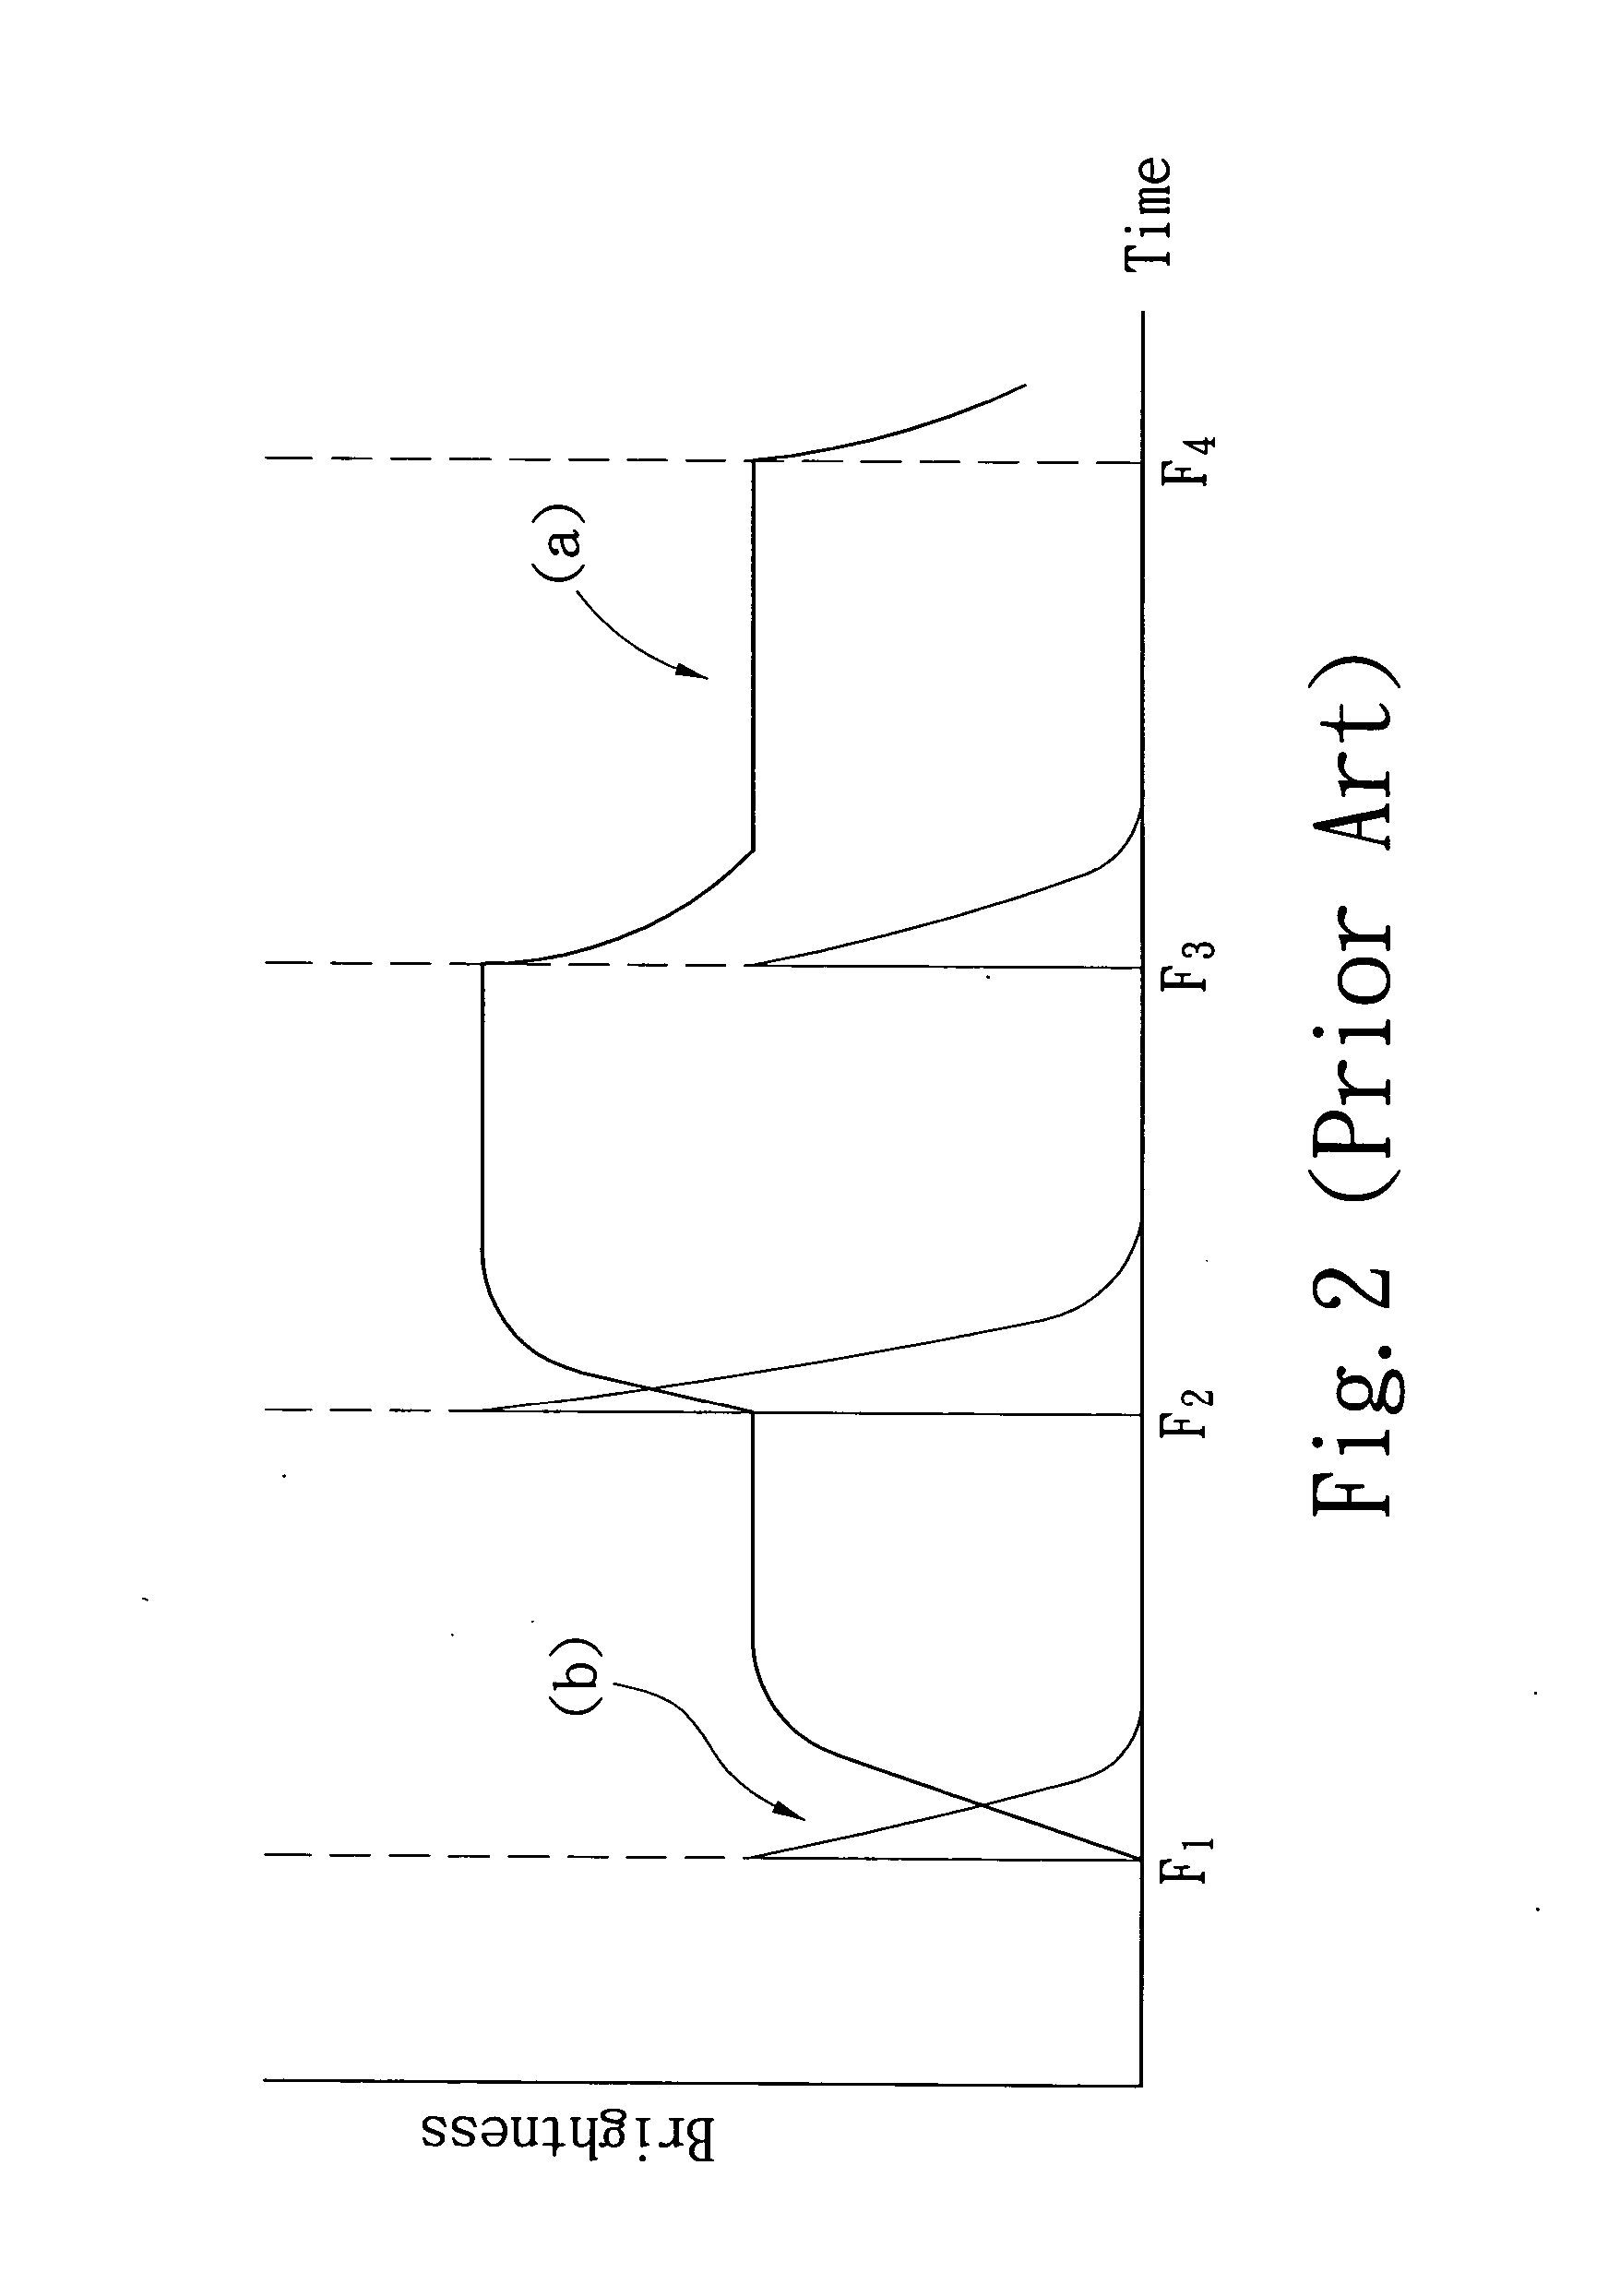 Driving device for quickly changing the gray level of the liquid crystal display and its driving method